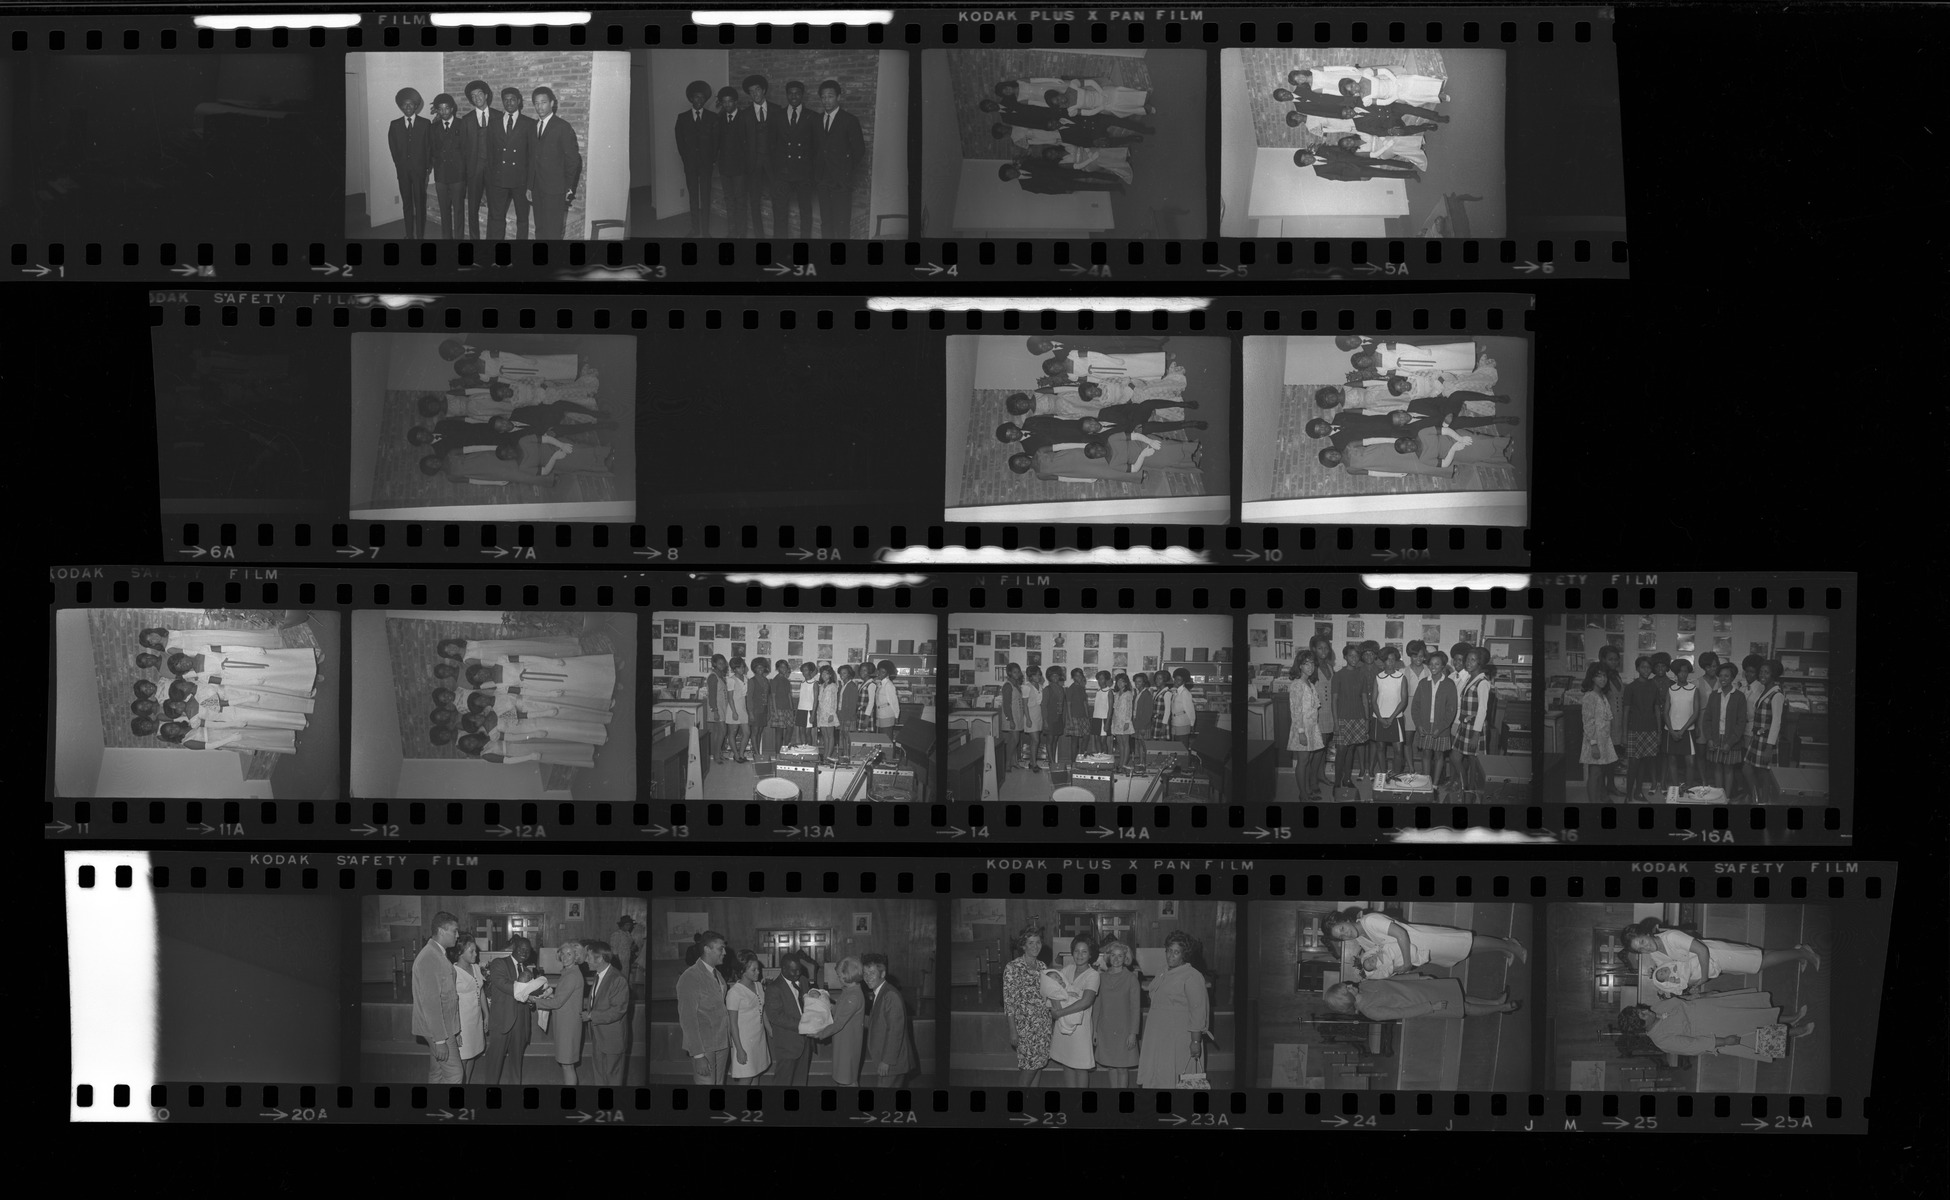 Set of negatives by Clinton Wright including Sunset Mortuary & employees, Kappas at Mrs. Pughley's, debutante group pictures at Mrs. Bennett's, Yolanda Arlington's baby Christening, Cosmo bar, and debutantes at Sight & Sound, 1969, page 1